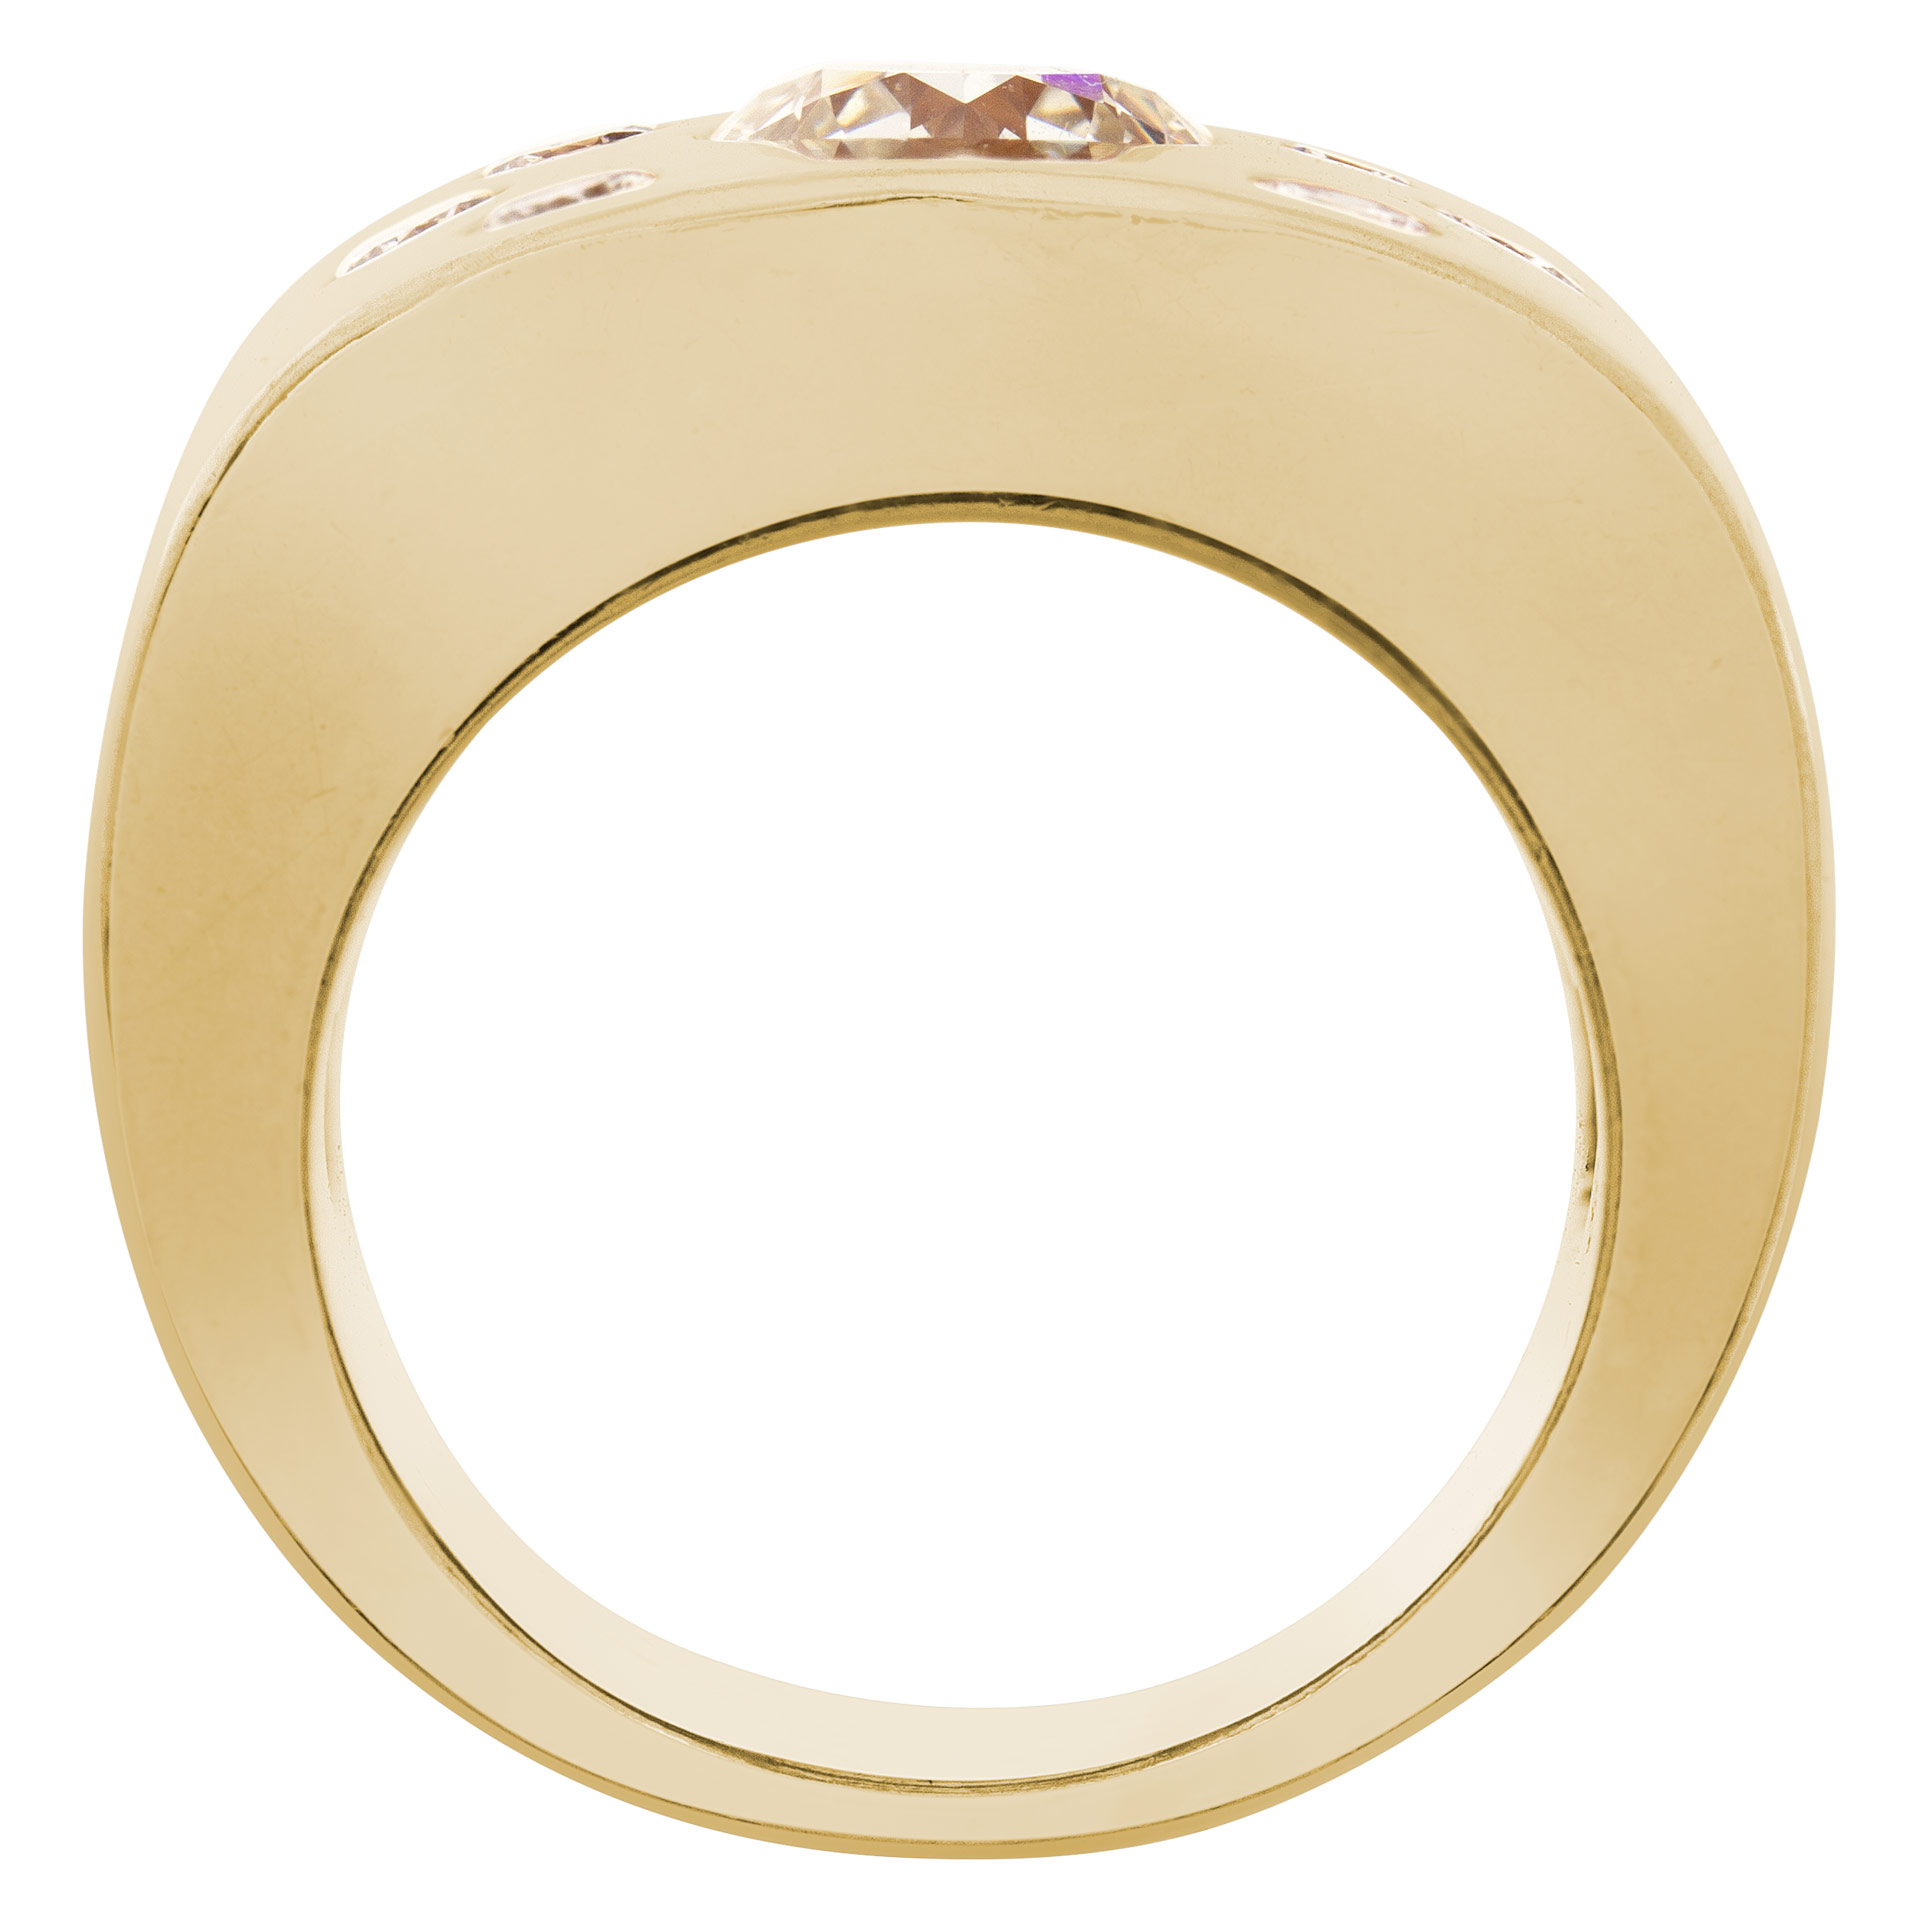 Wide diamonds ring in solid 14k yellow gold. Round brilliant cut diamonds total approx. weight: 1.42 carat,` image 4